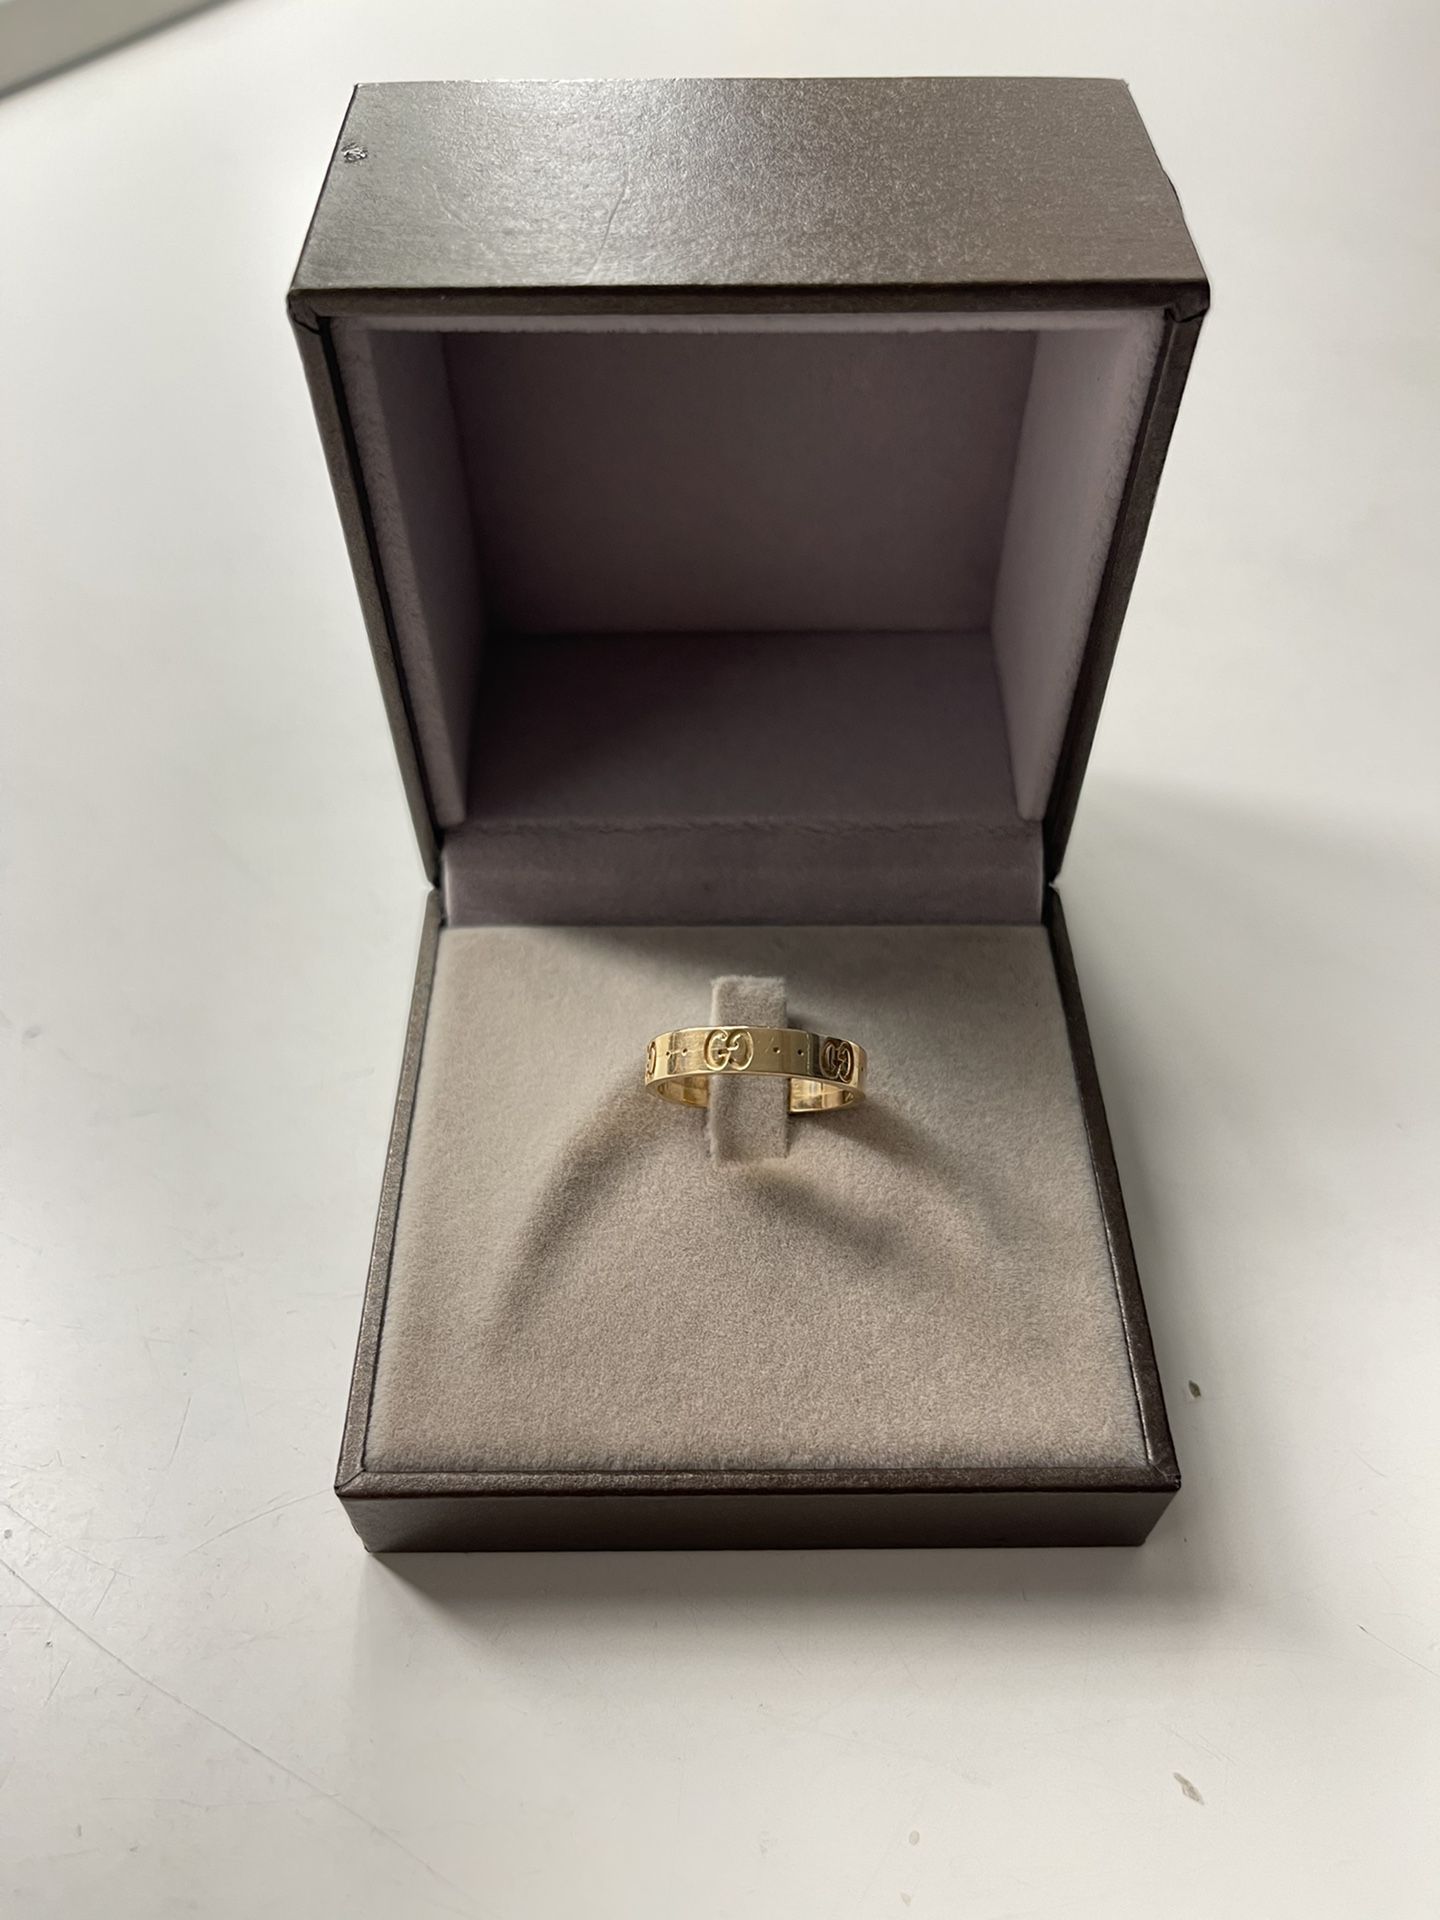 WOMEN’S ROSE GOLD ICON GUCCI RING SIZE 6 $700 OBO OR TRADE 4 PS5